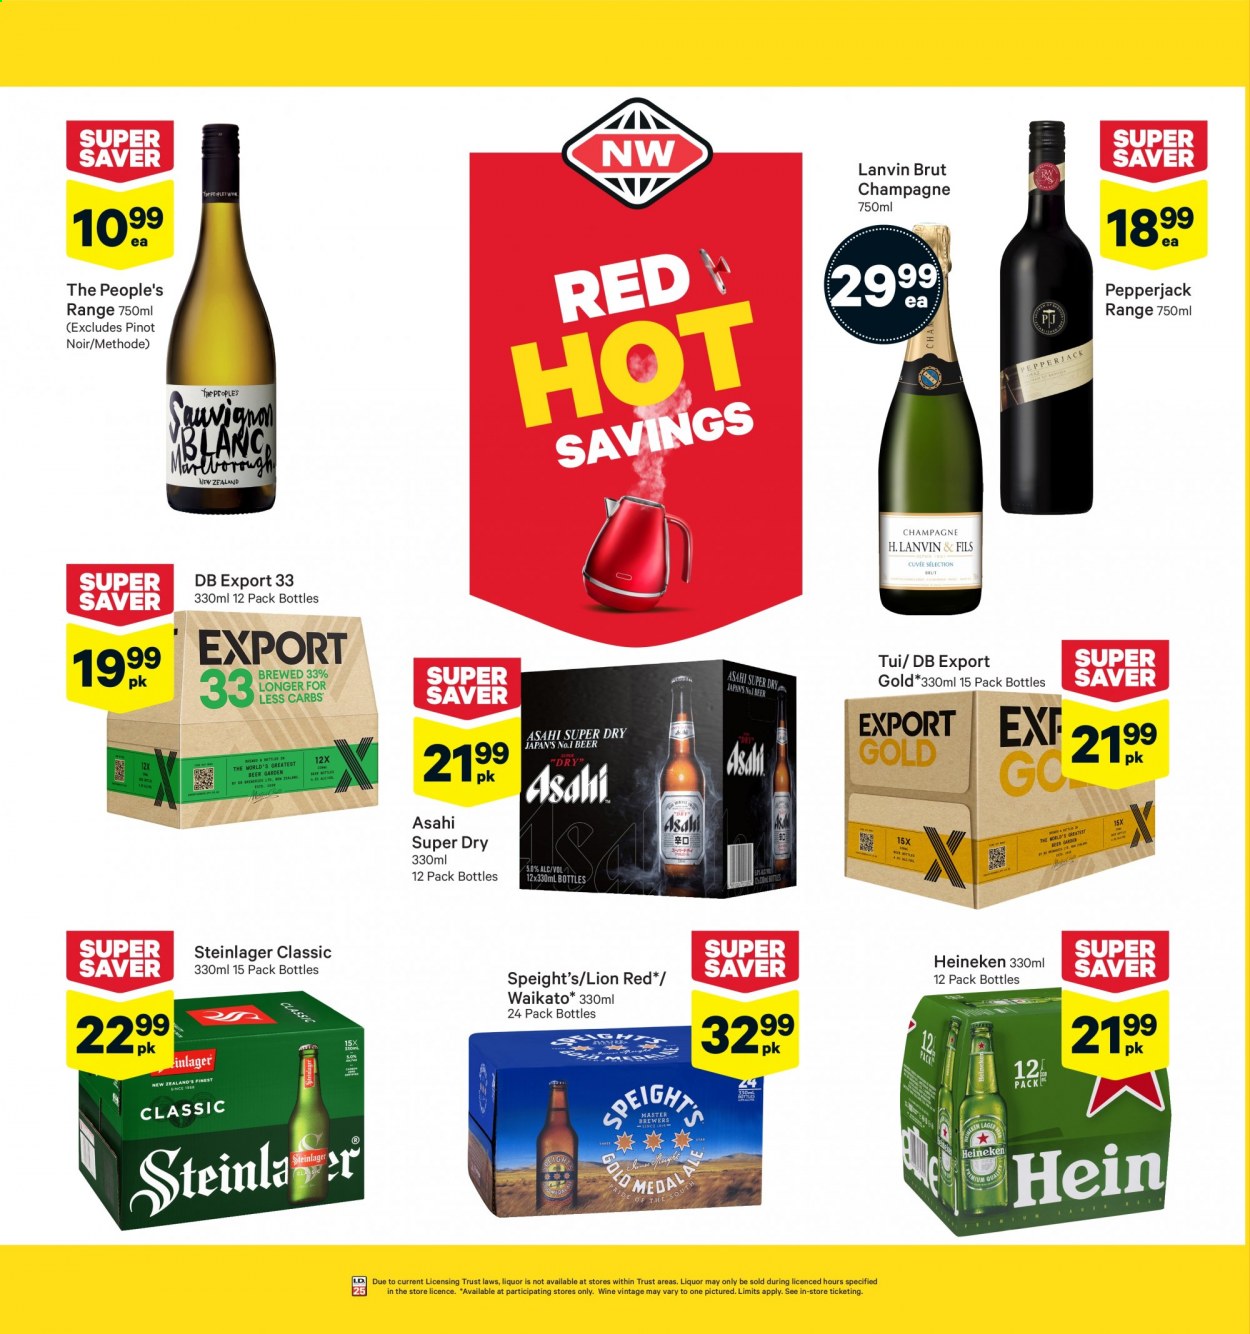 thumbnail - New World mailer - 21.06.2021 - 27.06.2021 - Sales products - Pepper Jack cheese, red wine, champagne, wine, Pinot Noir, Cuvée, beer, Heineken, Steinlager, Lanvin. Page 6.